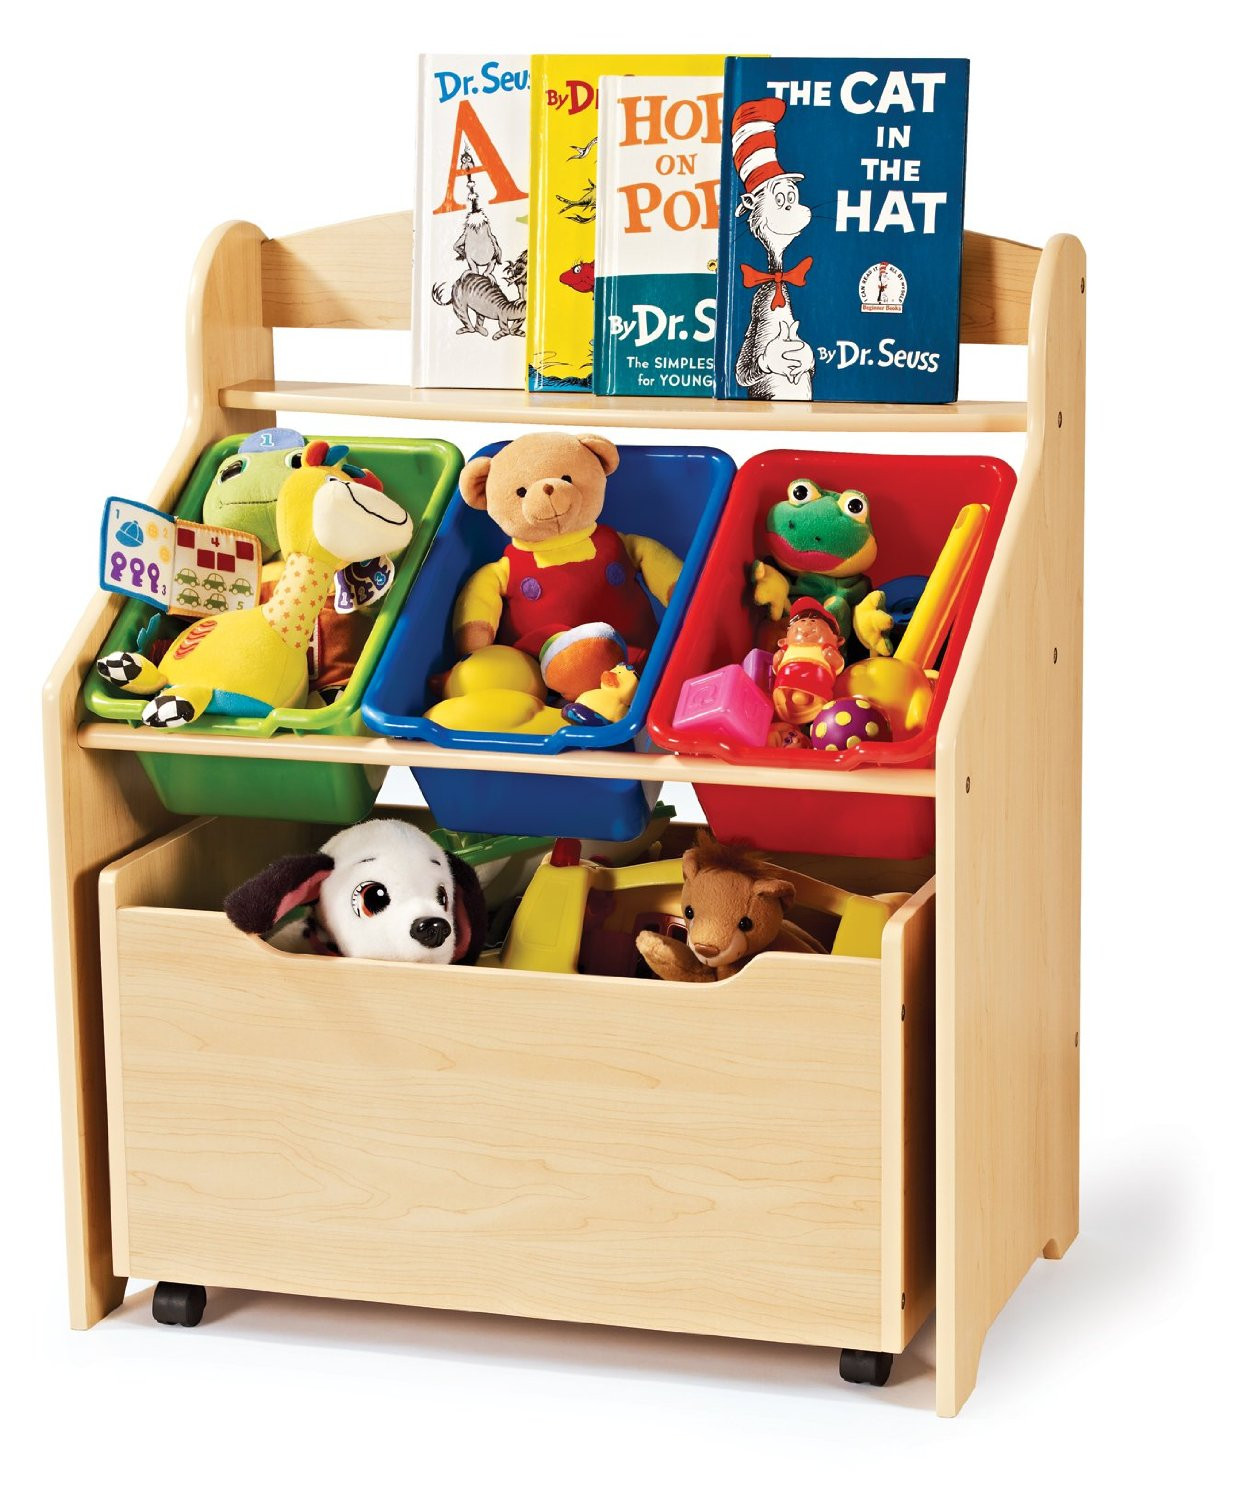 Kids Storage Organizer
 10 Types of Toy Organizers for Kids Bedrooms and Playrooms